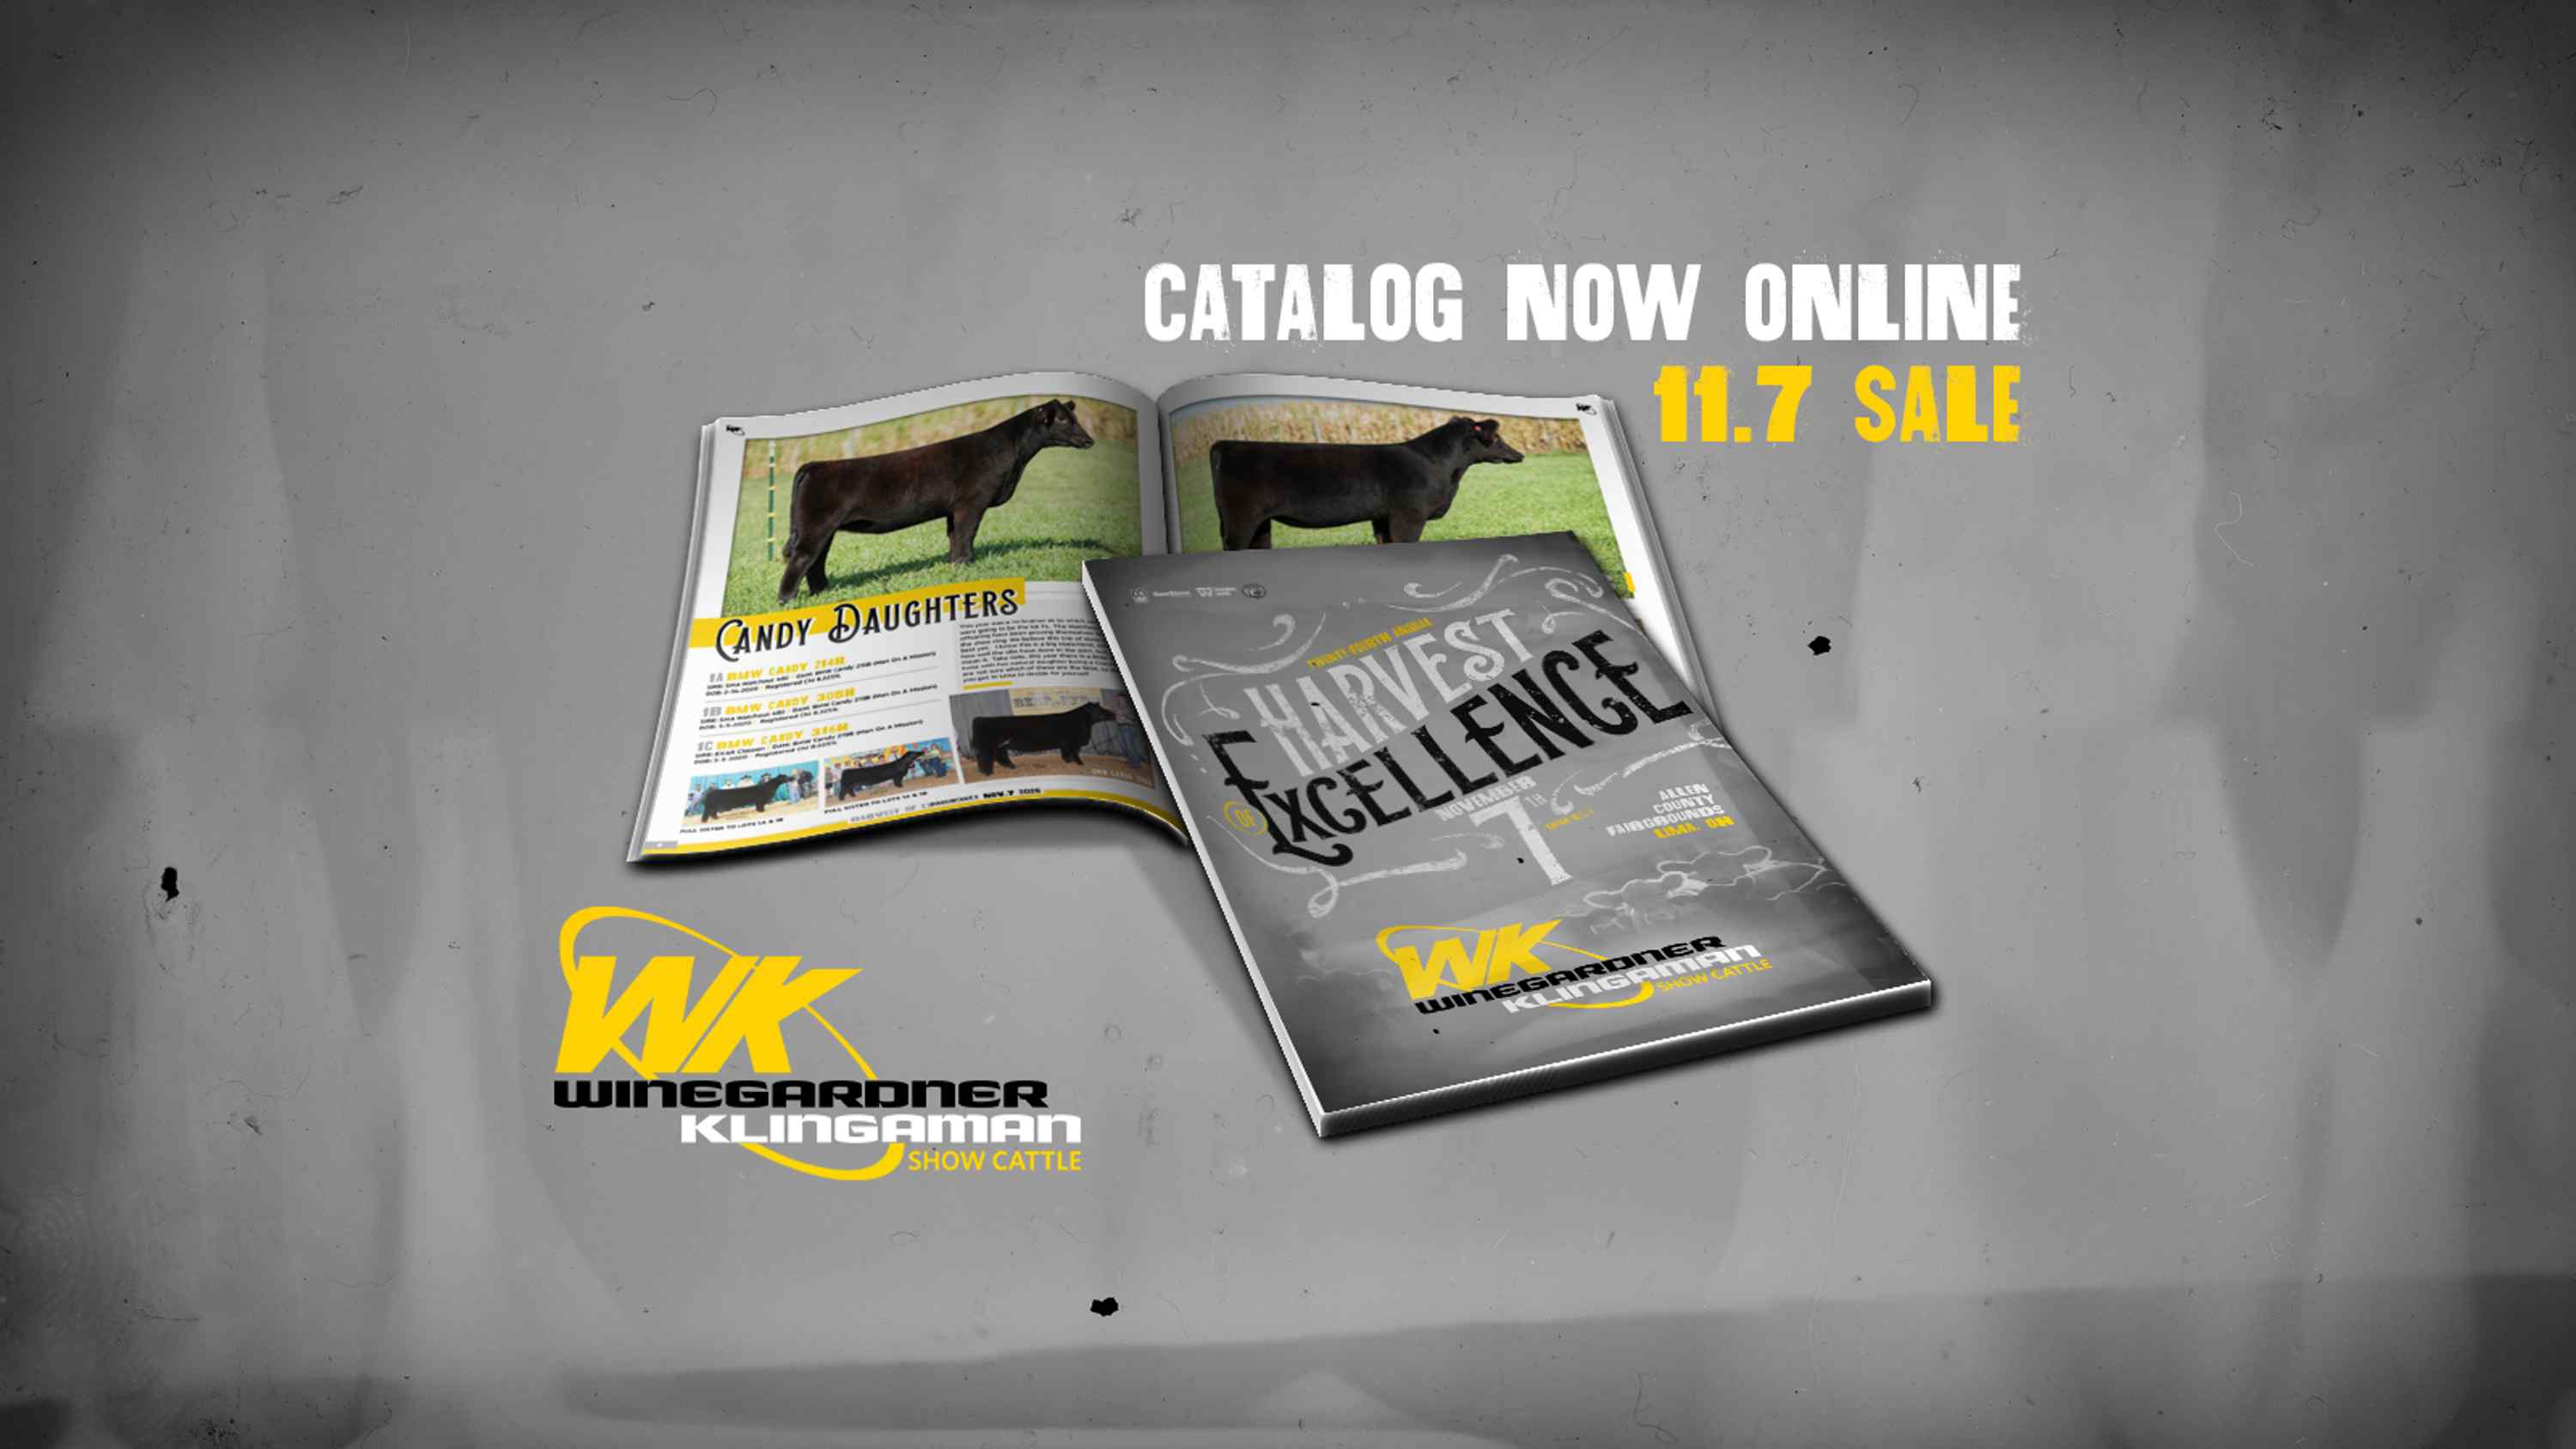 Harvest of Excellence Sale Catalog NOW ONLINE